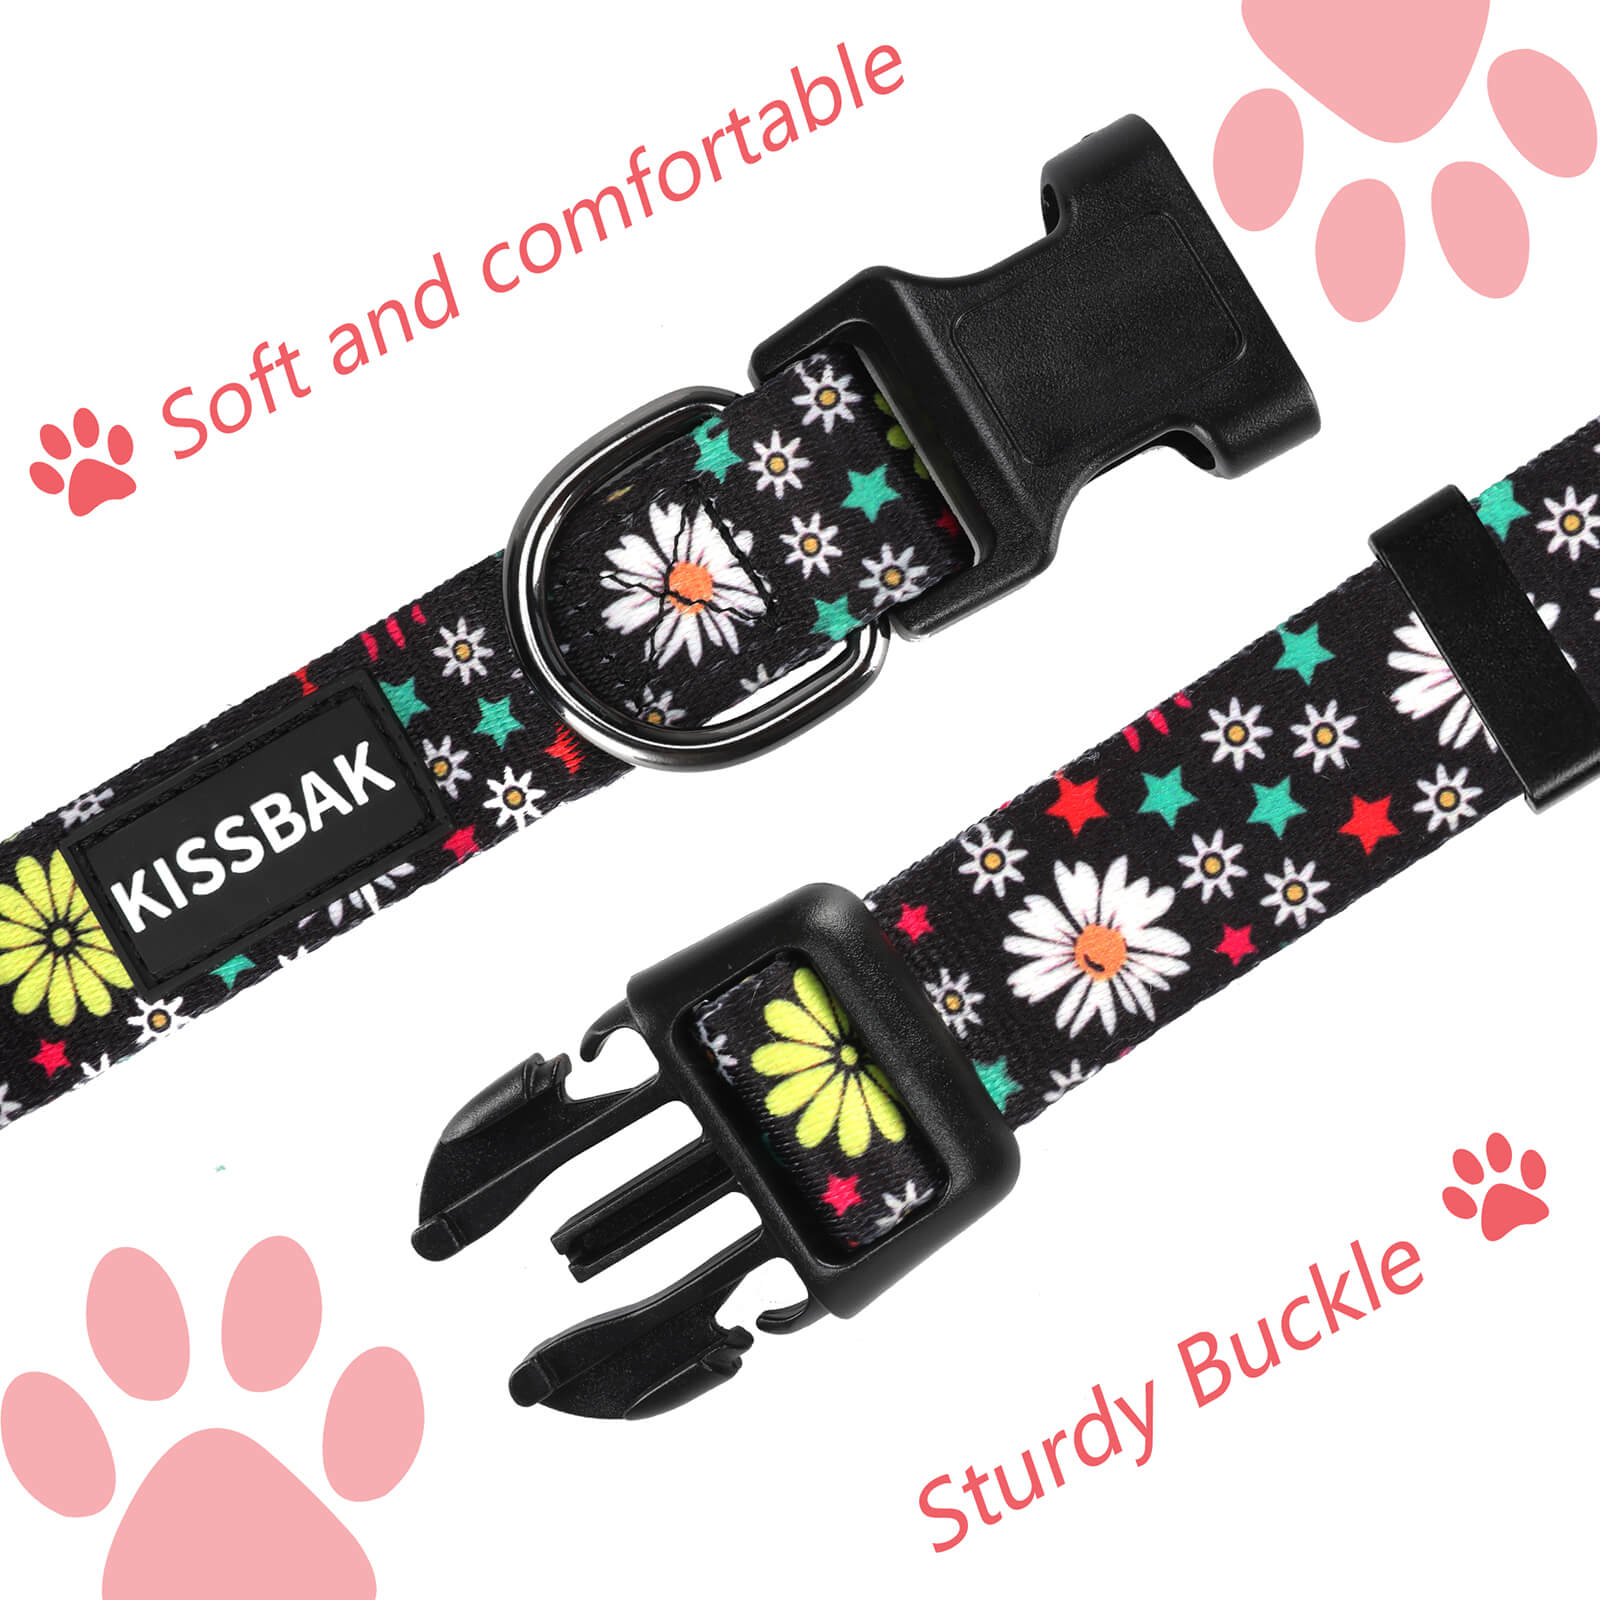 Lucy & Co. Rolling Around Malibu Adjustable Dog Collar- Cute Designer Pet  Collar for Small, Medium, Large Dogs- Buckle Closure Dog Accessories